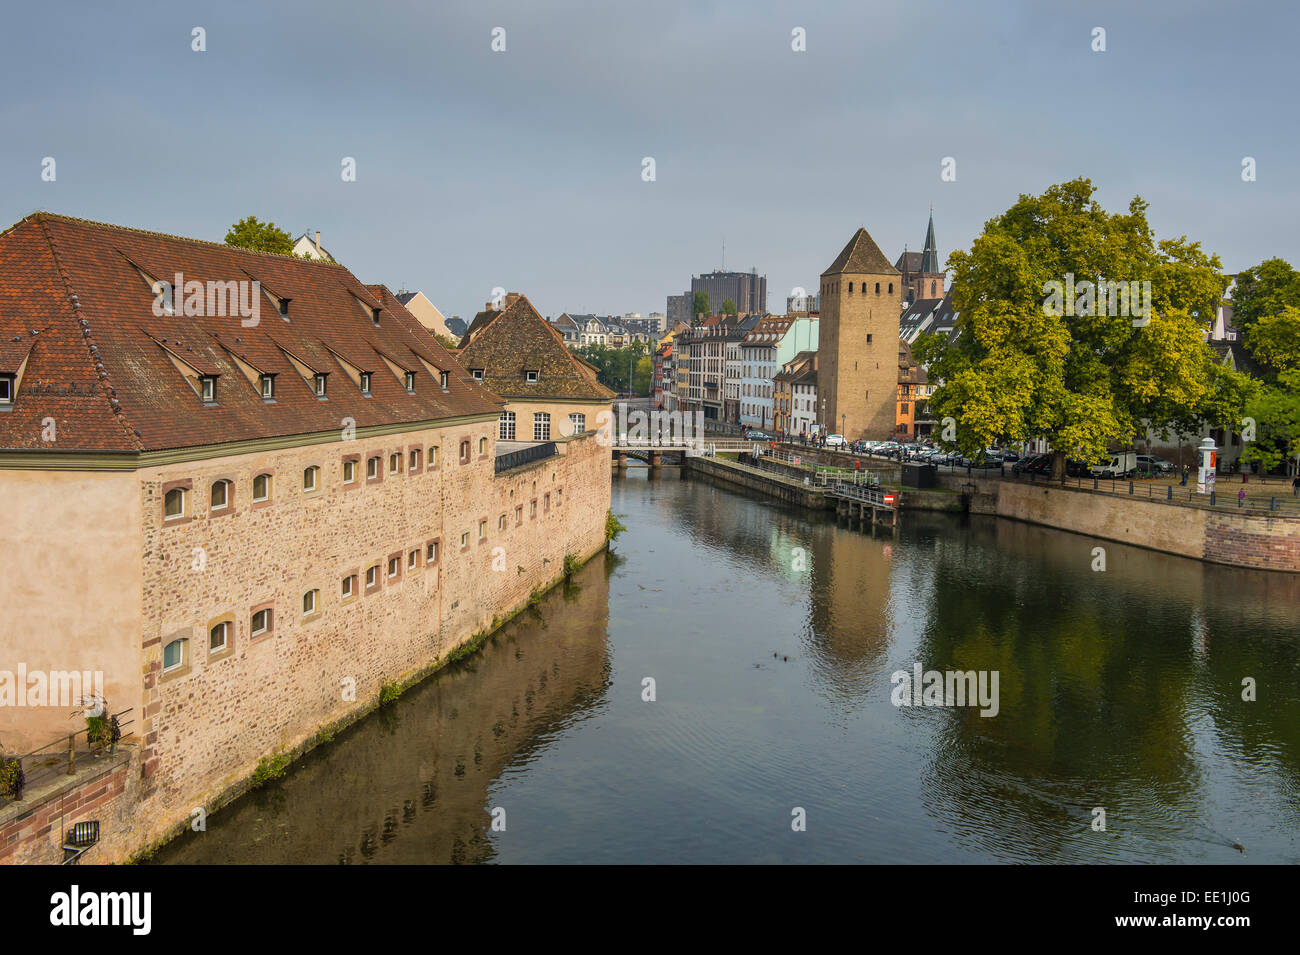 Barrage Vauban, former city fortifications on the Ill River, barrage, Strasbourg, Alsace, France, Europe Stock Photo